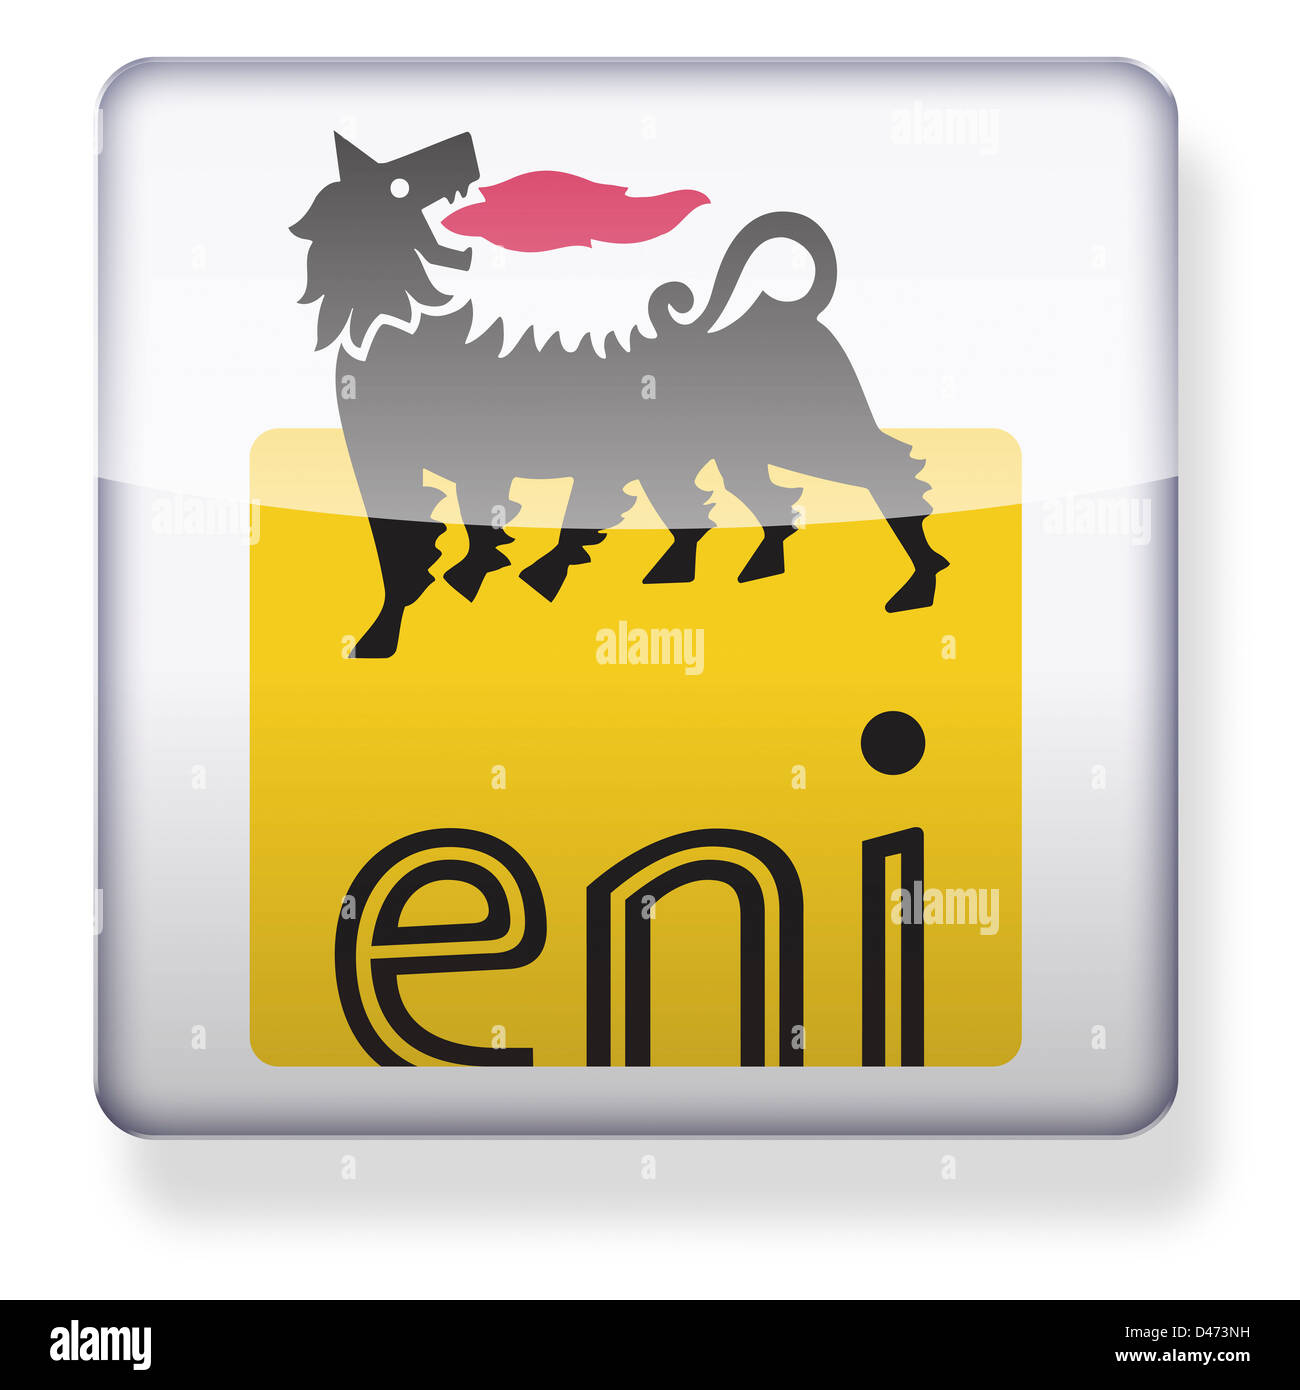 eni logo as an app icon. Clipping path included. Stock Photo